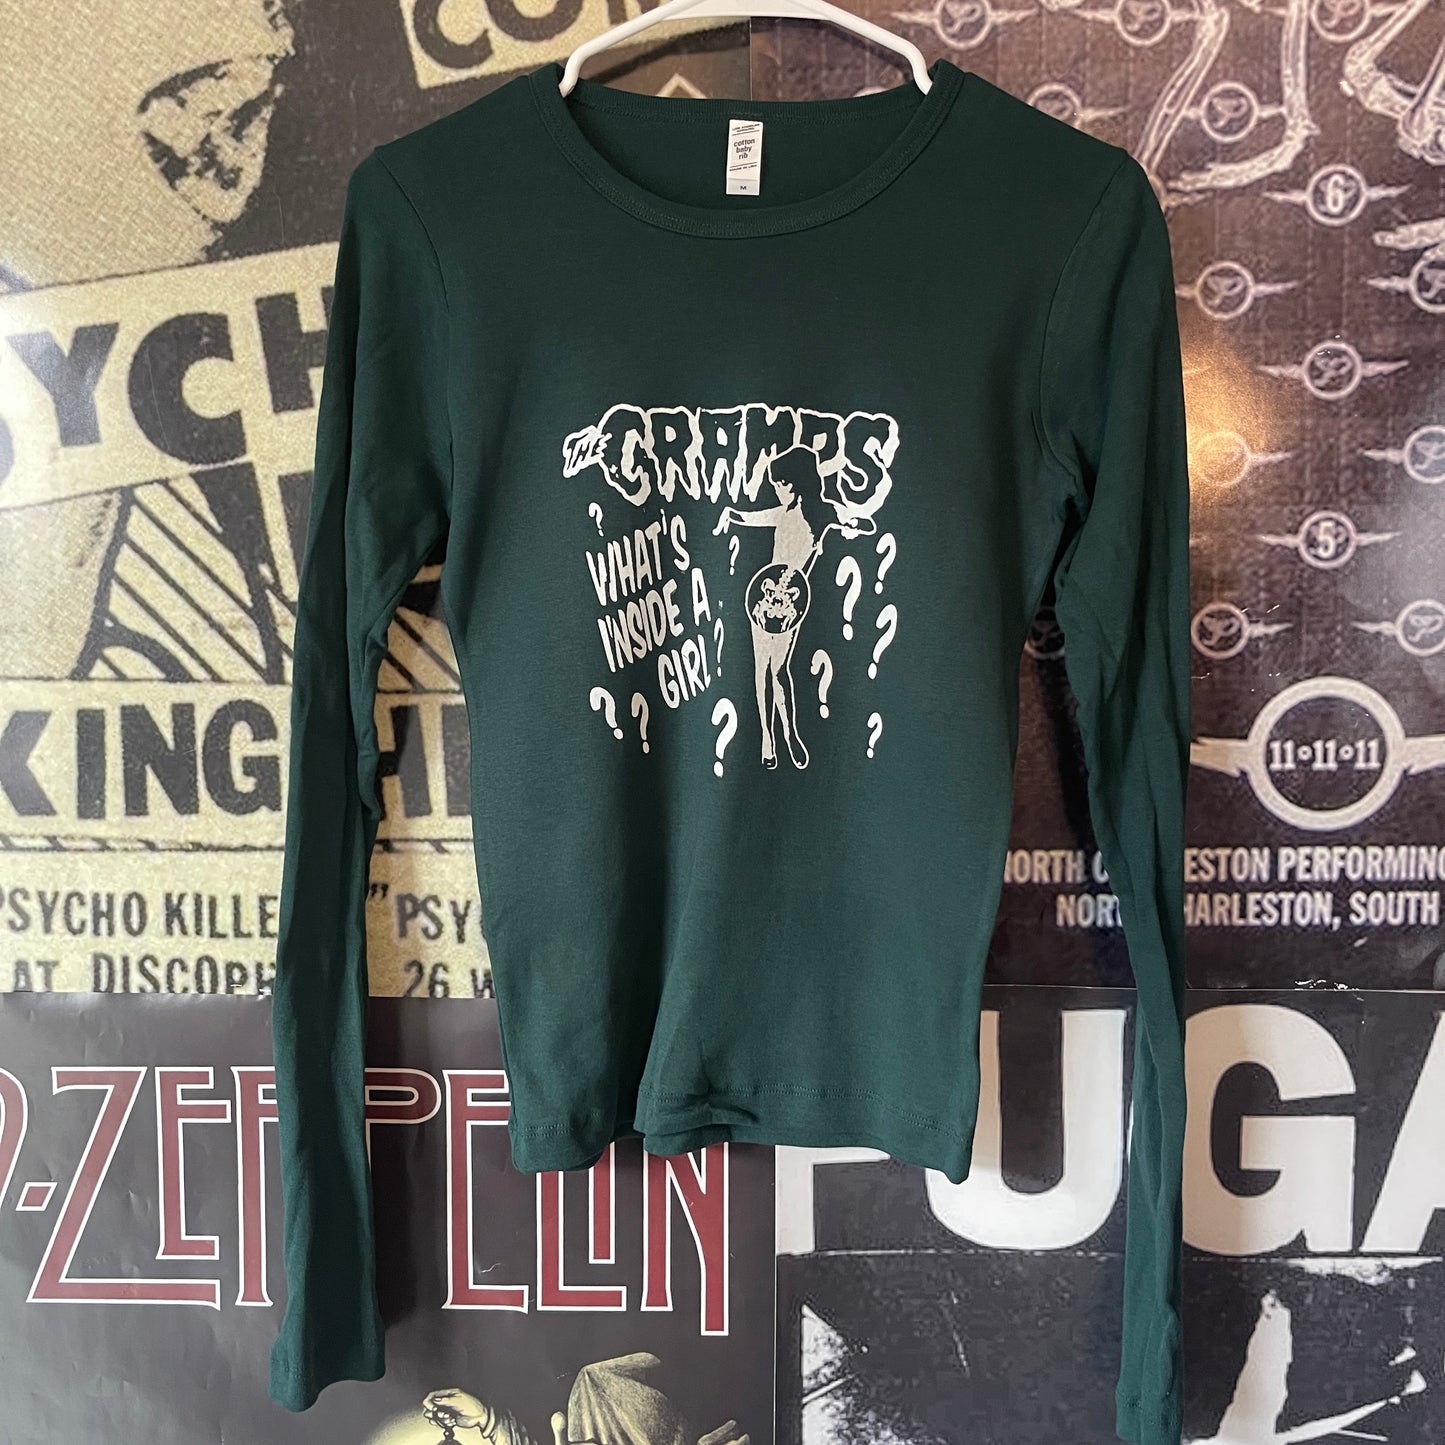 The cramps green baby style long sleeve SM/MED